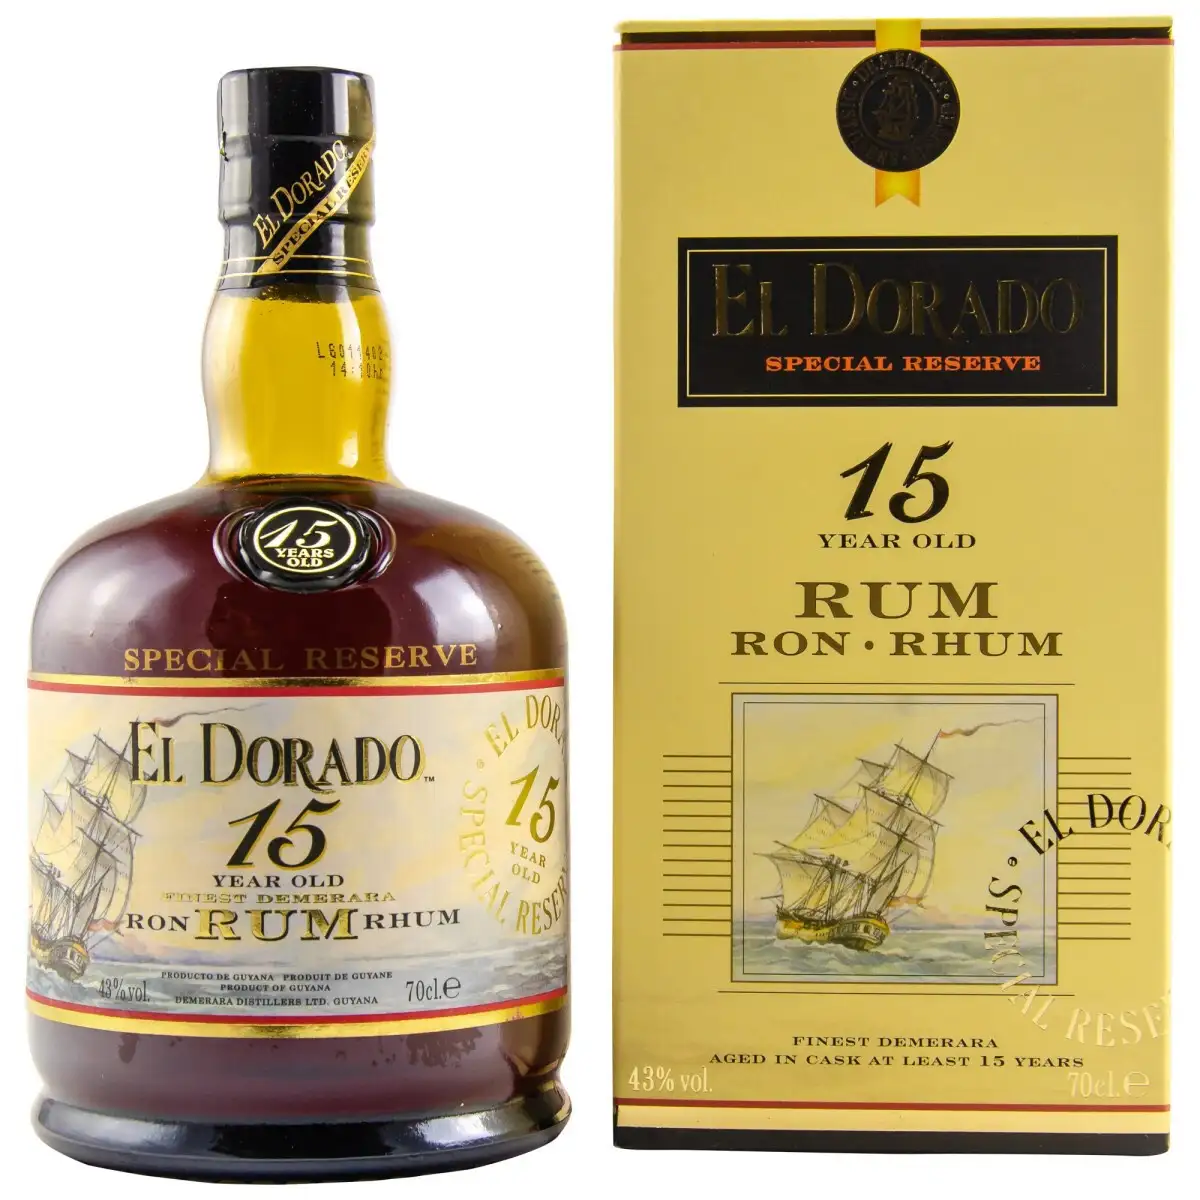 Image of the front of the bottle of the rum El Dorado 15